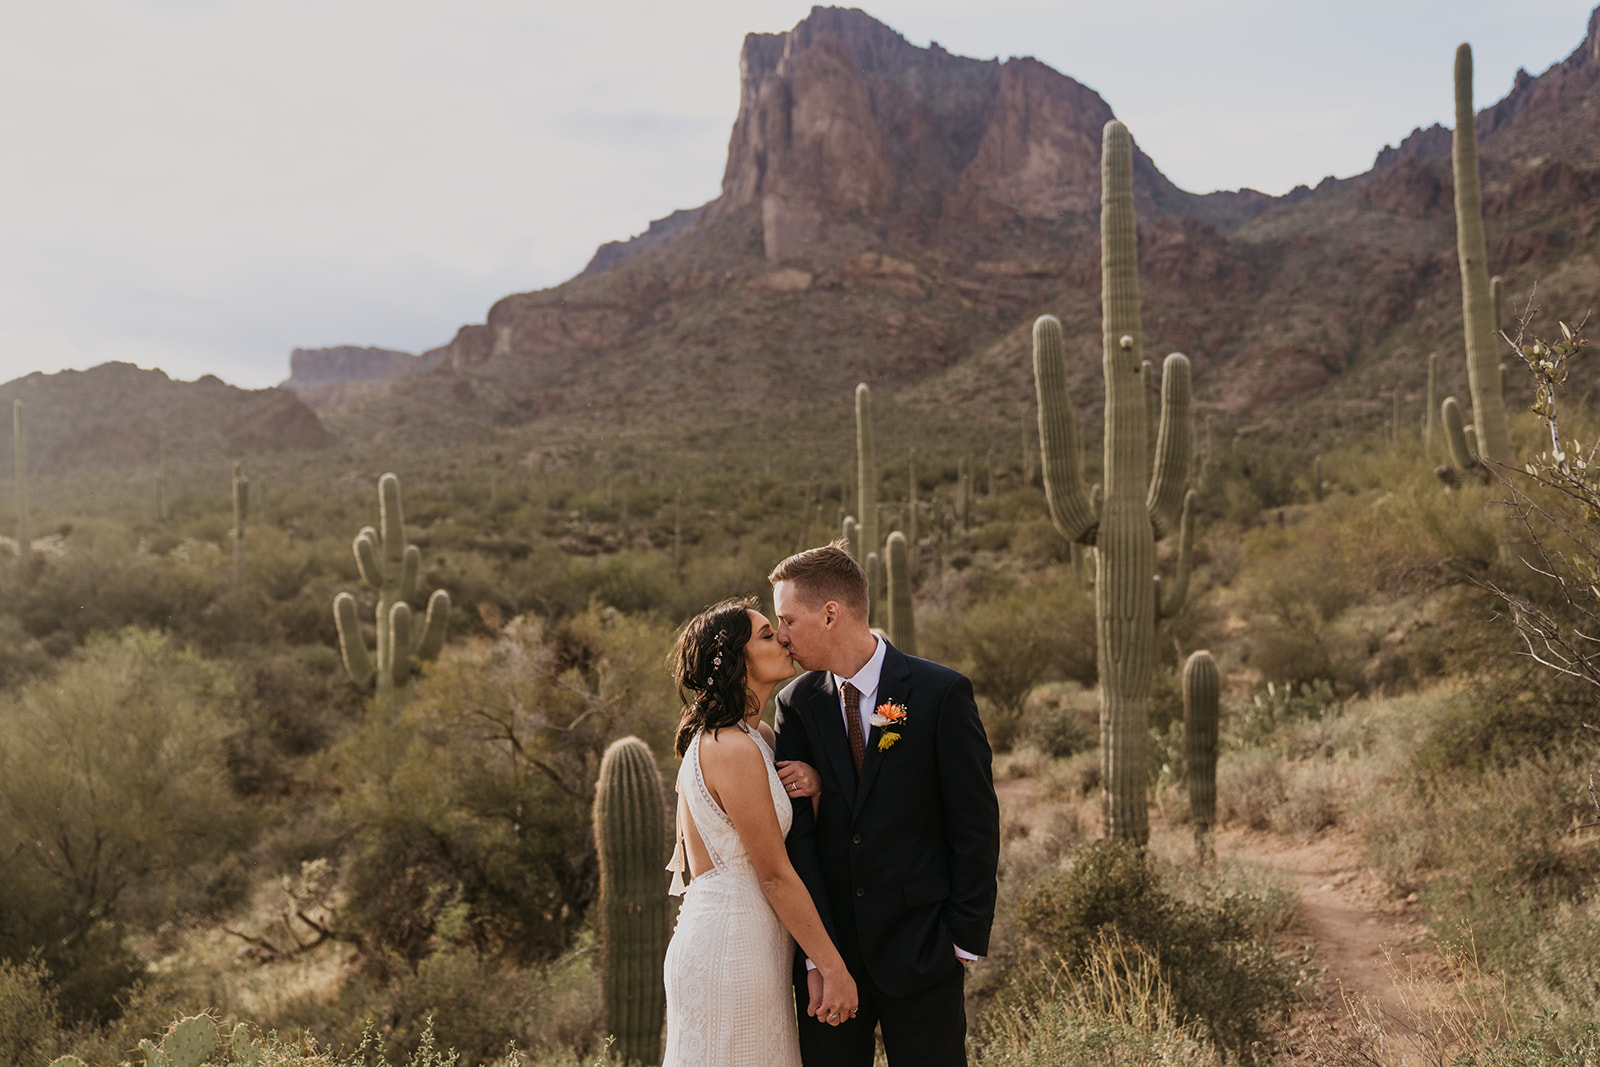 bride and groom hugging next to saguaro cactus with mountains in the background at their elopement in phoenix, arizona